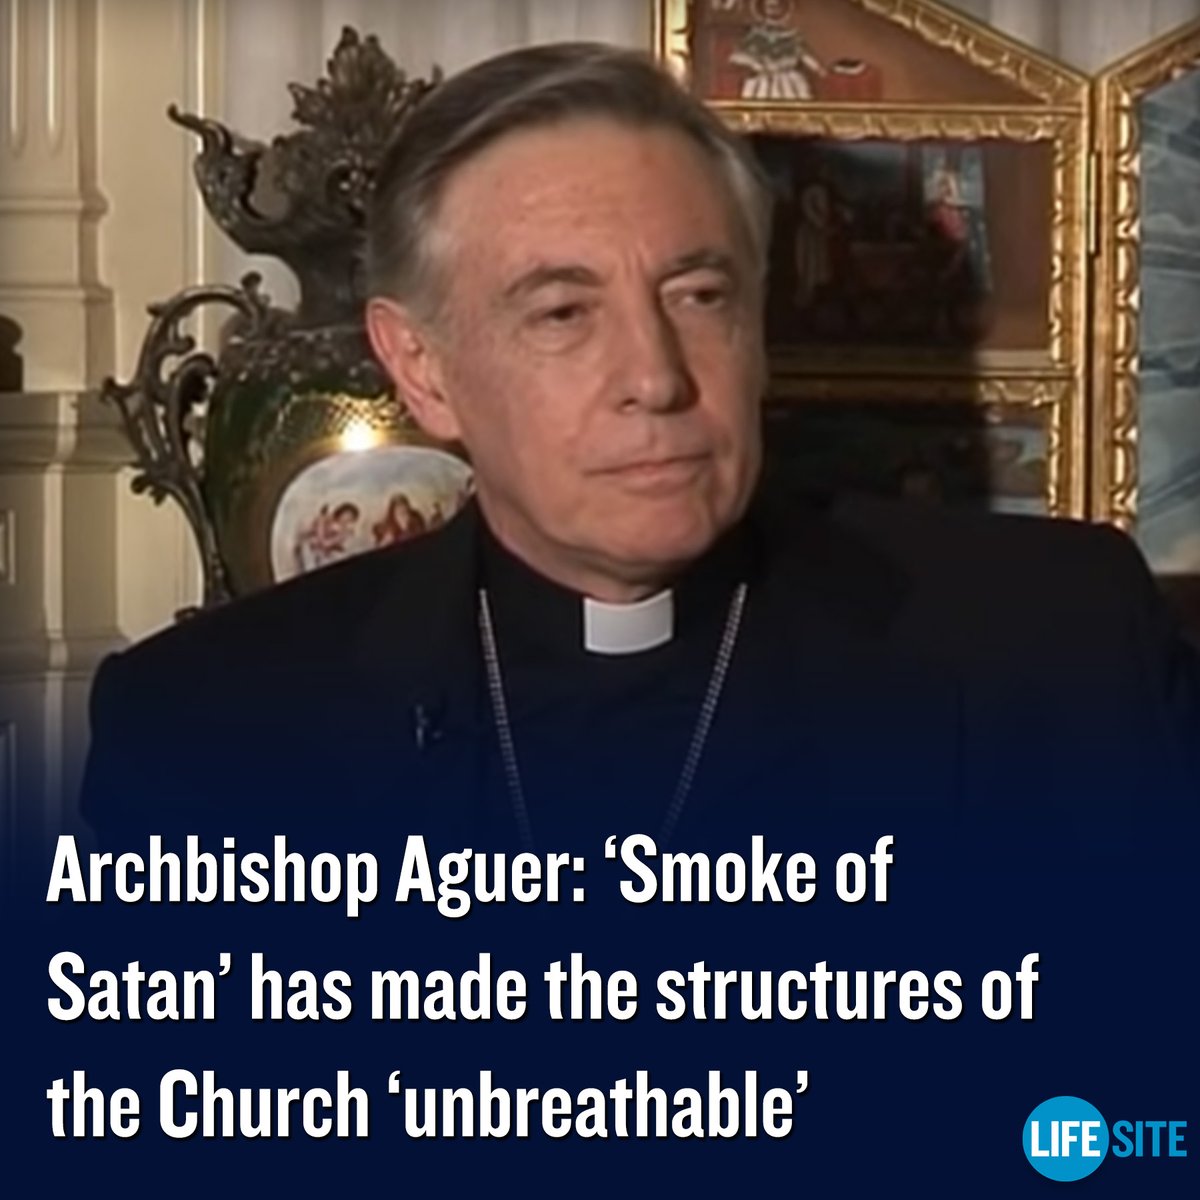 The 'officialdom installed in Rome for slightly more than a decade continues its policy of 'canceling' those who... seek to serve Jesus Christ from orthodoxy and Tradition,' said Bishop Aguer.

MORE: lifesitenews.com/opinion/archbi…

#CatholicX #CatholicChurch #Catholic #Vatican